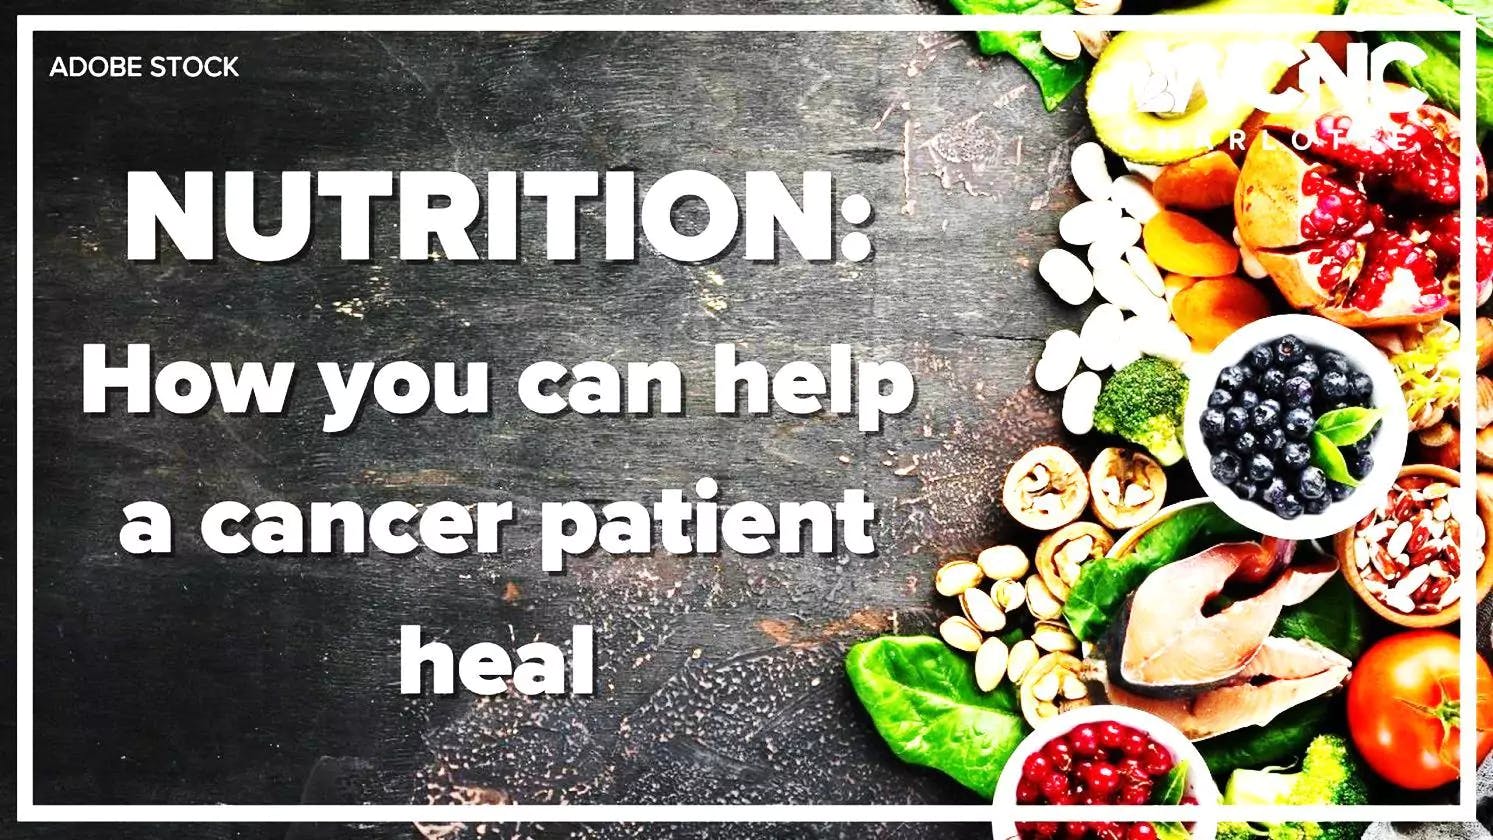 Nutritional Advice for Cancer Patients- 'Food for the Fight' 